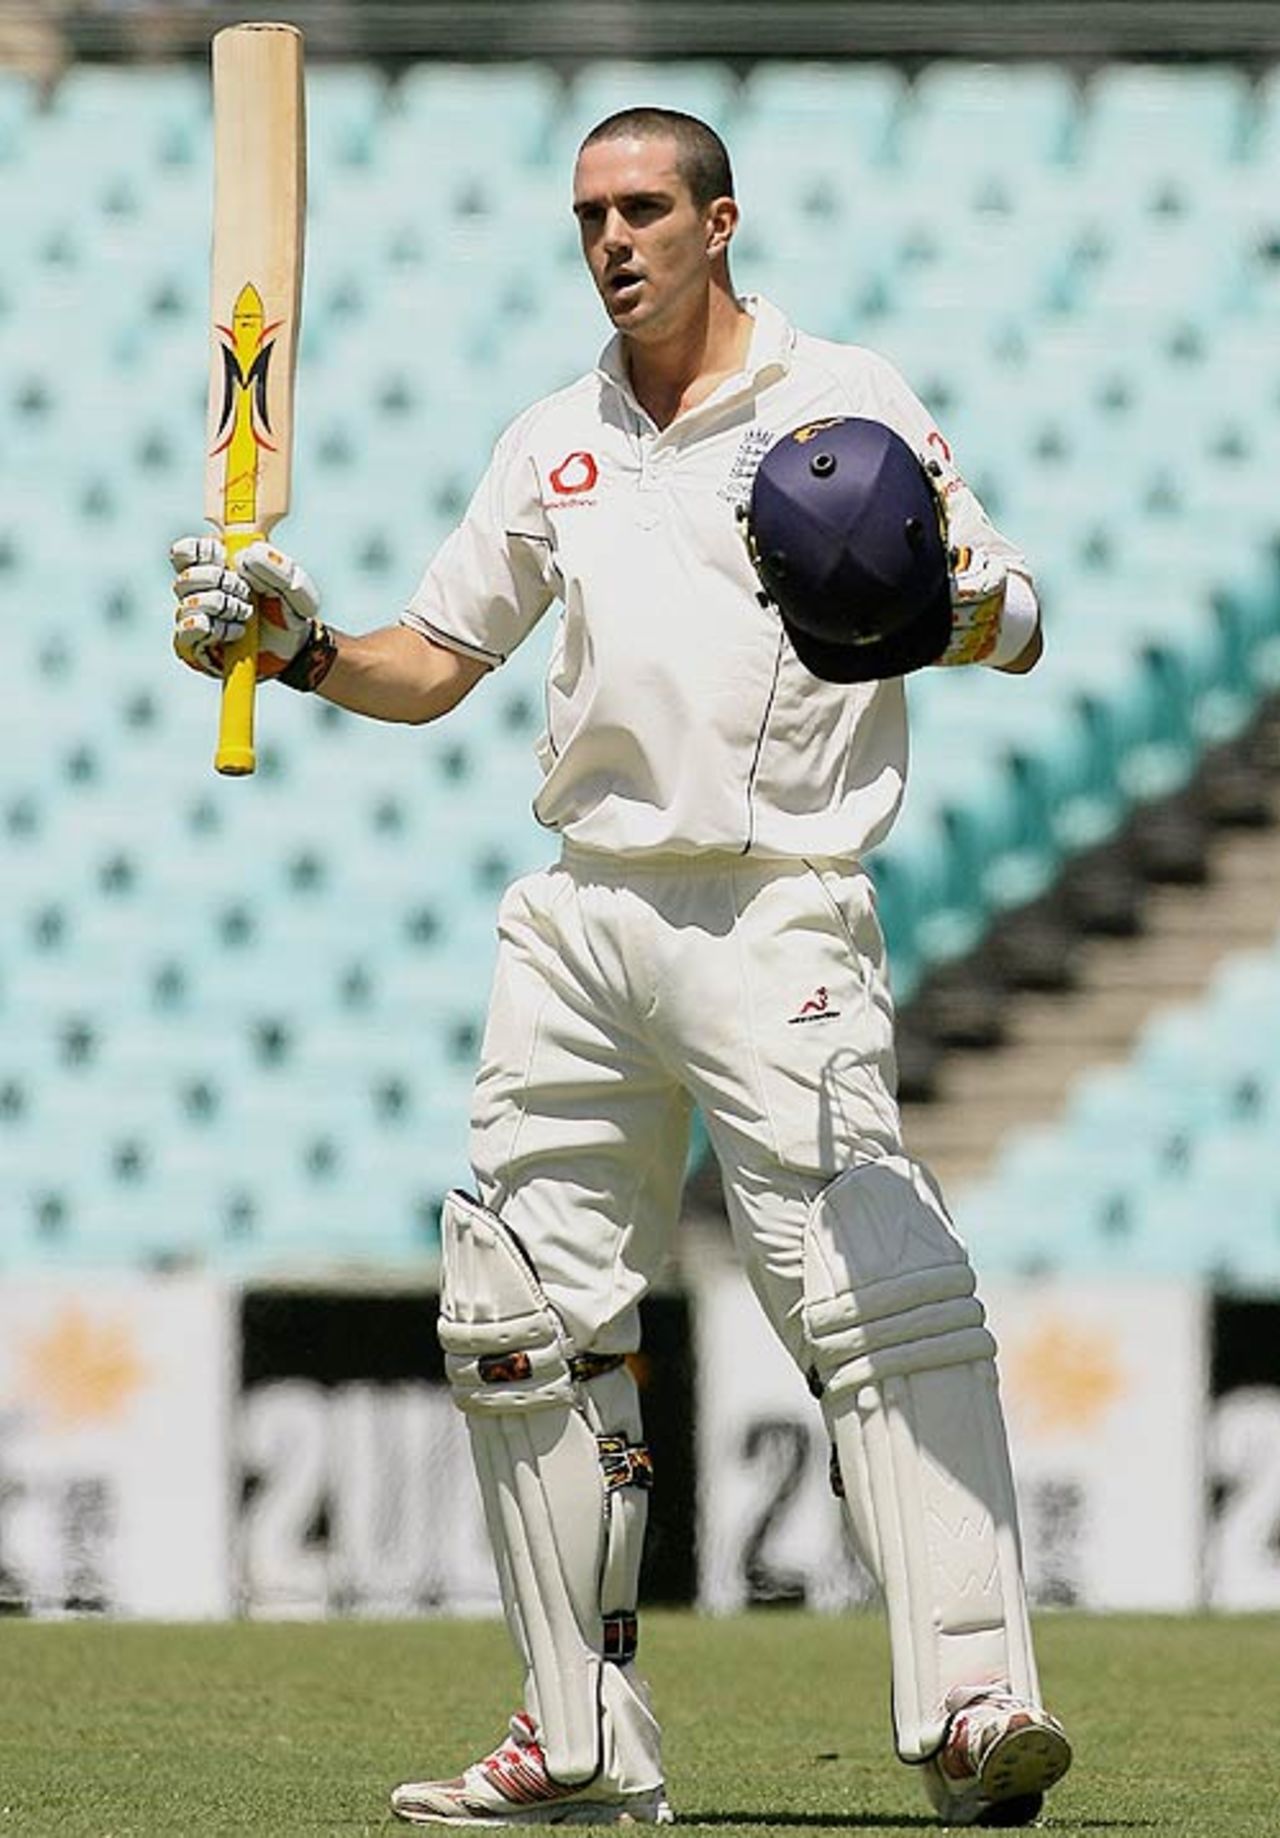 Kevin Pietersen acknowledges the crowds after reaching his century, New South Wales v England, Sydney, November 14, 2006